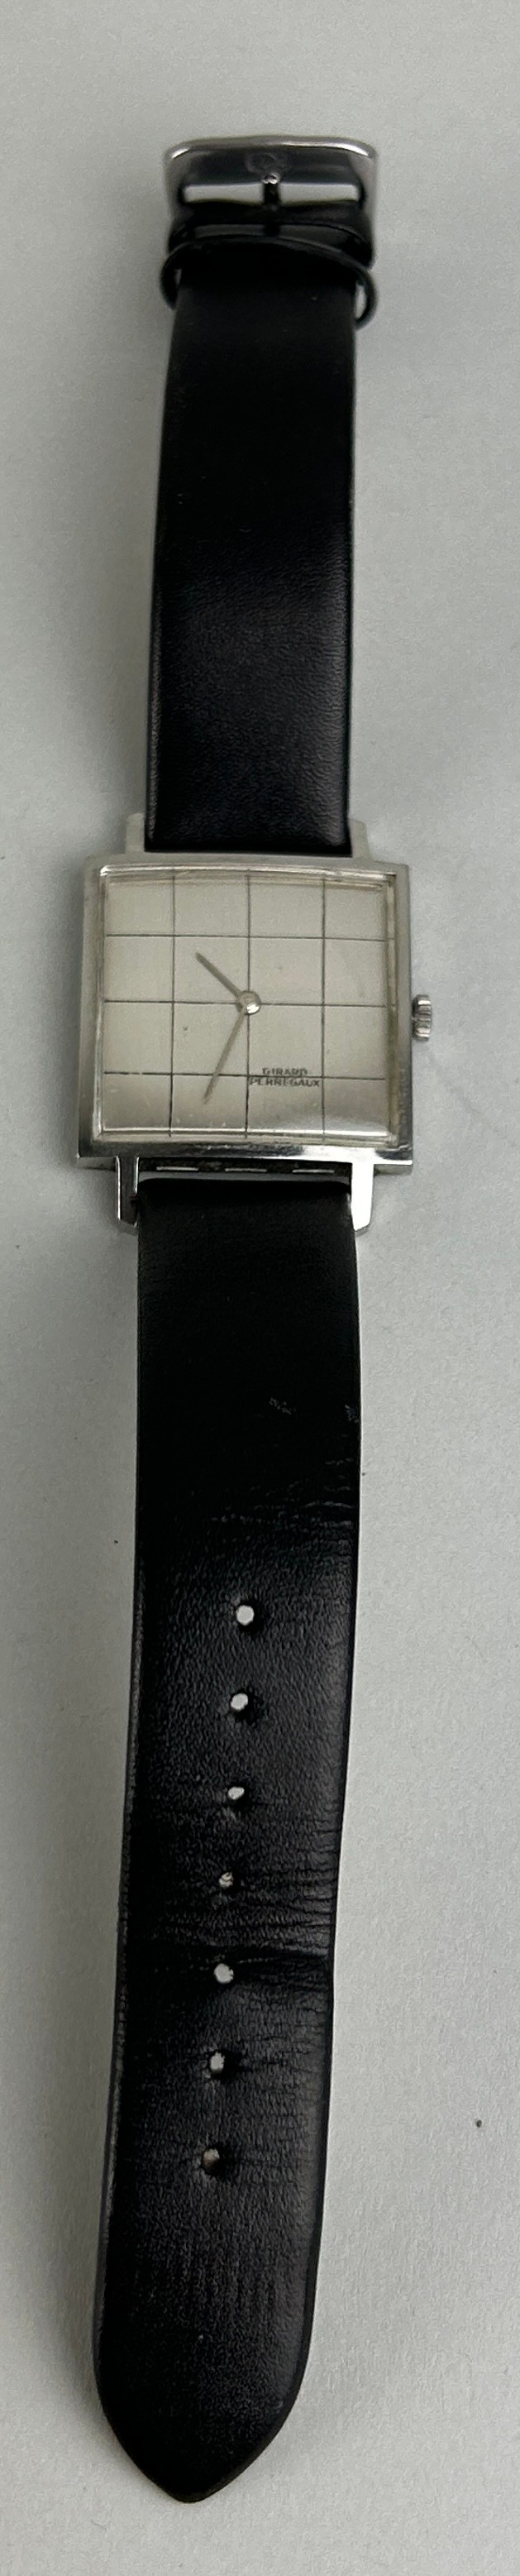 GIRARD PERREGAUX: A STAINLESS STEEL WATCH WITH UNRELATED STRAP,